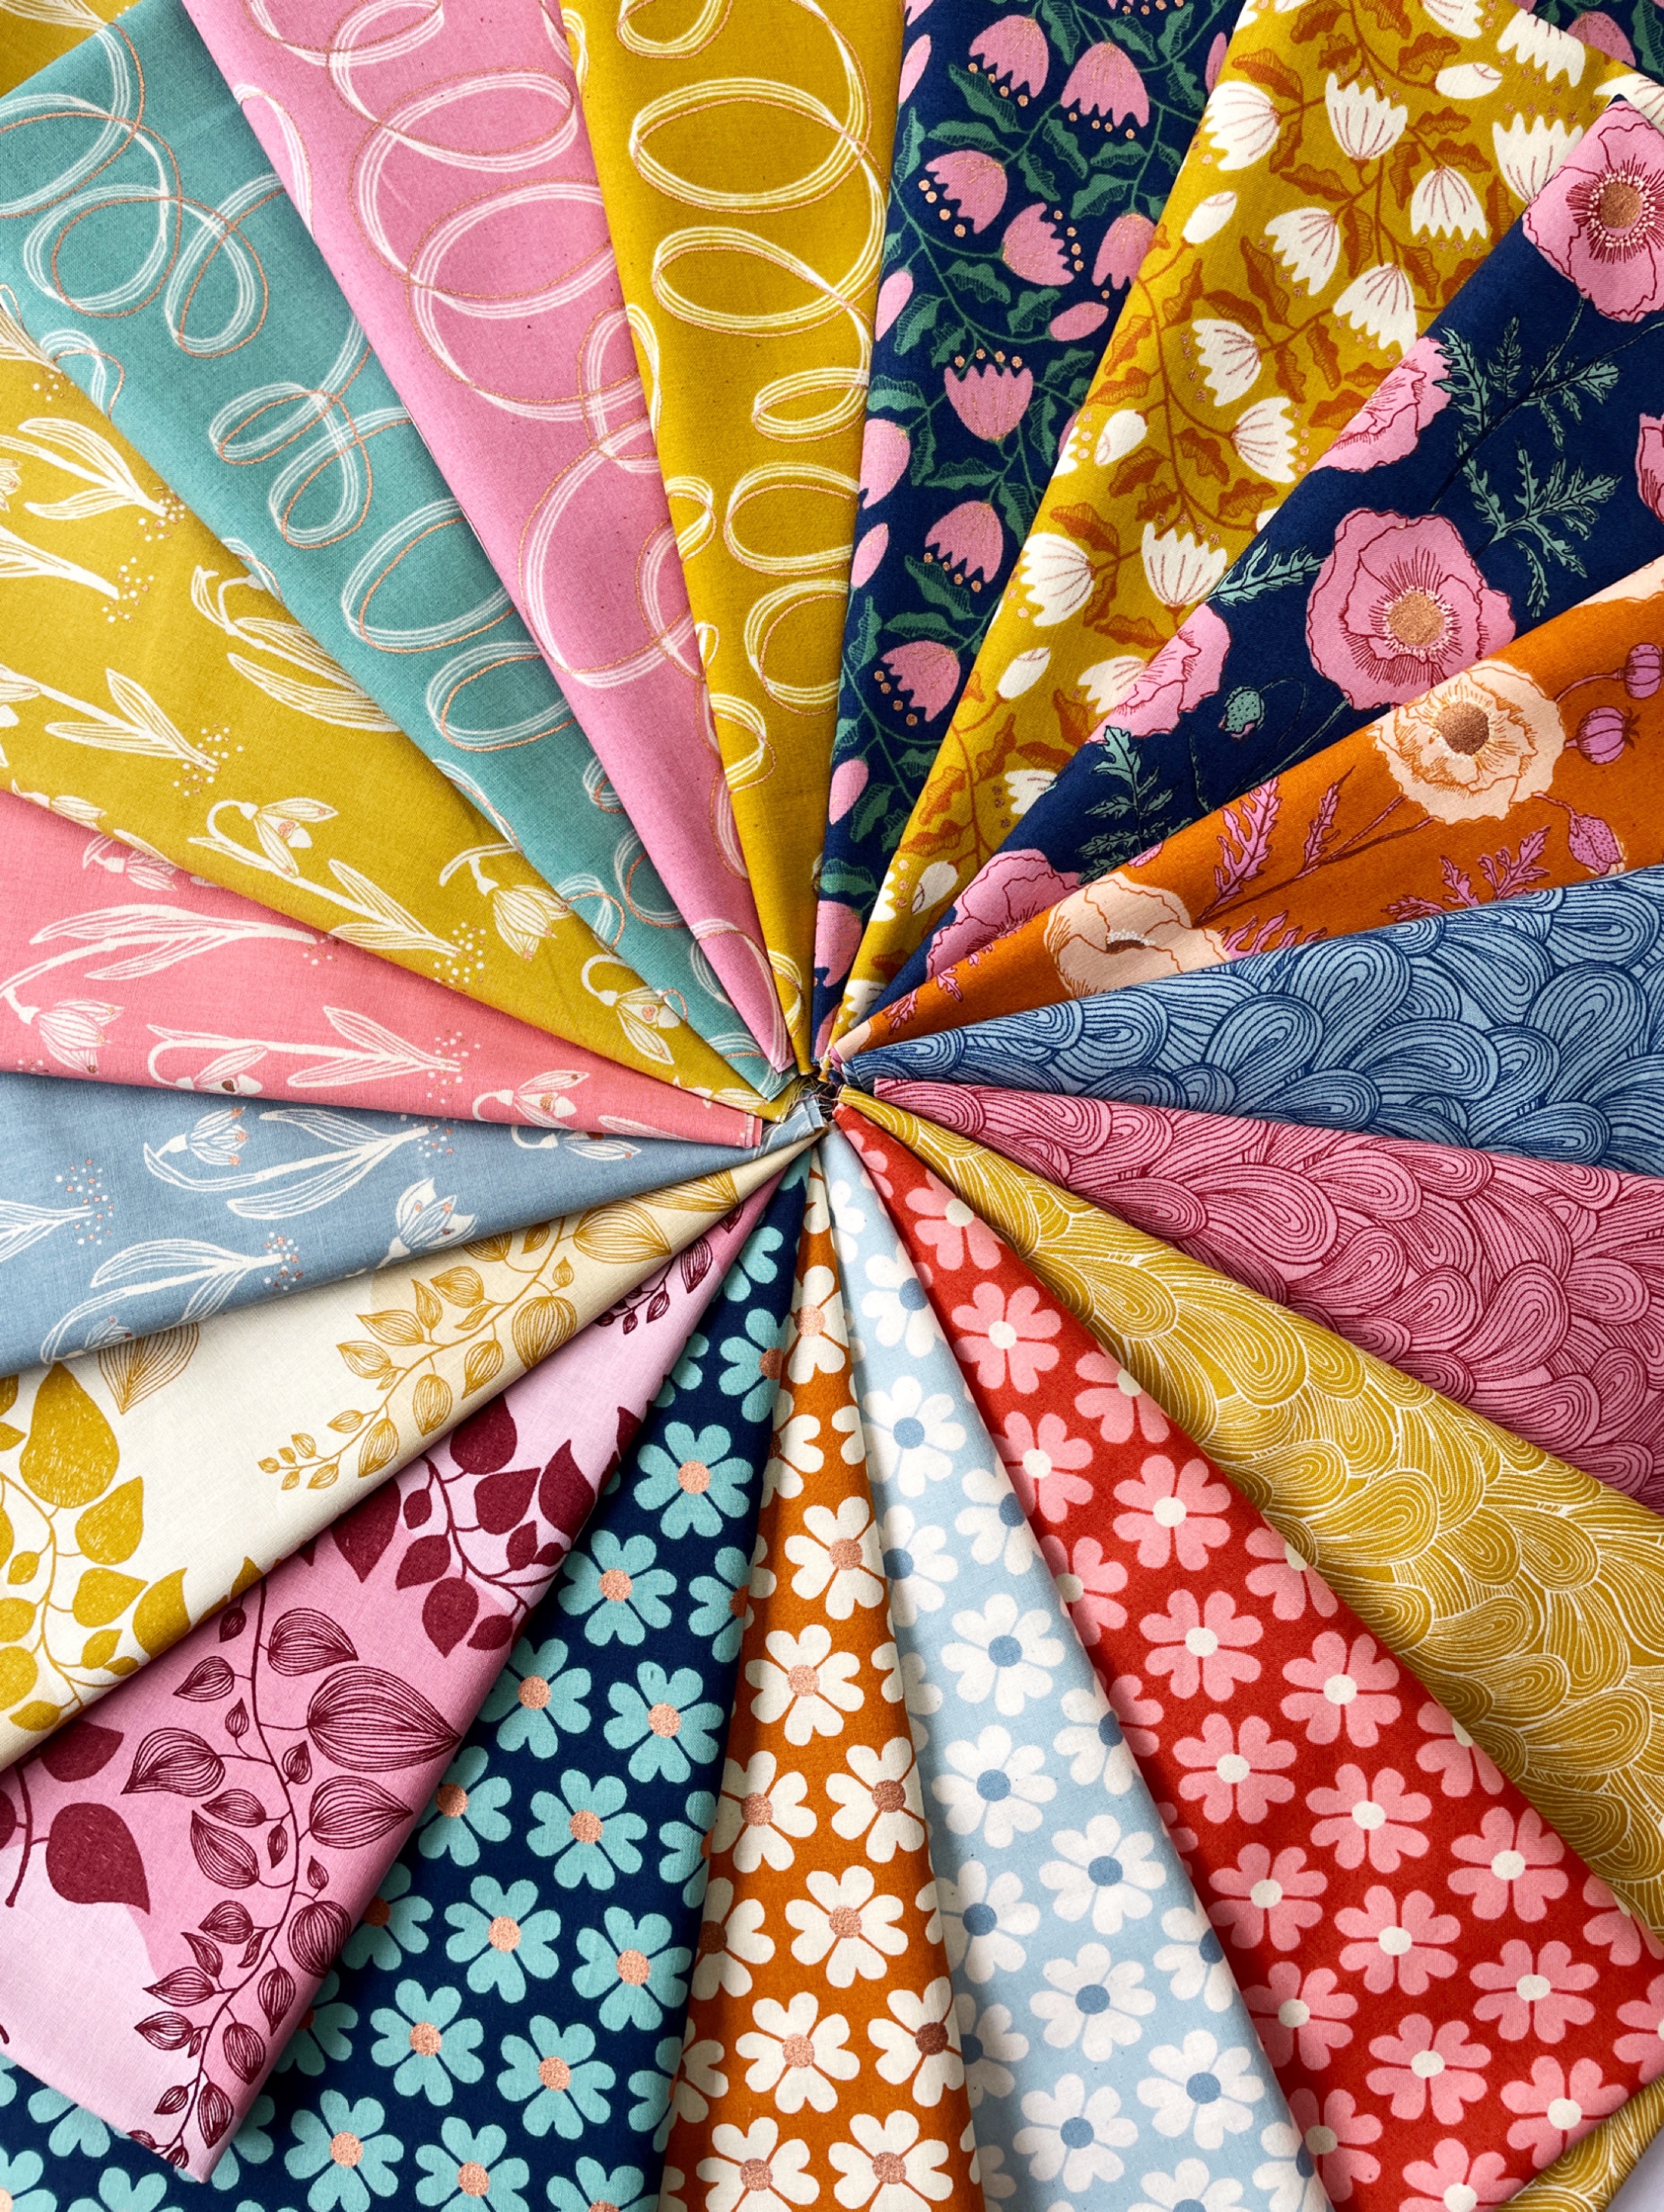 Unruly Nature collection by Ruby Star Society. 100% cotton patchwork and quilting fabric